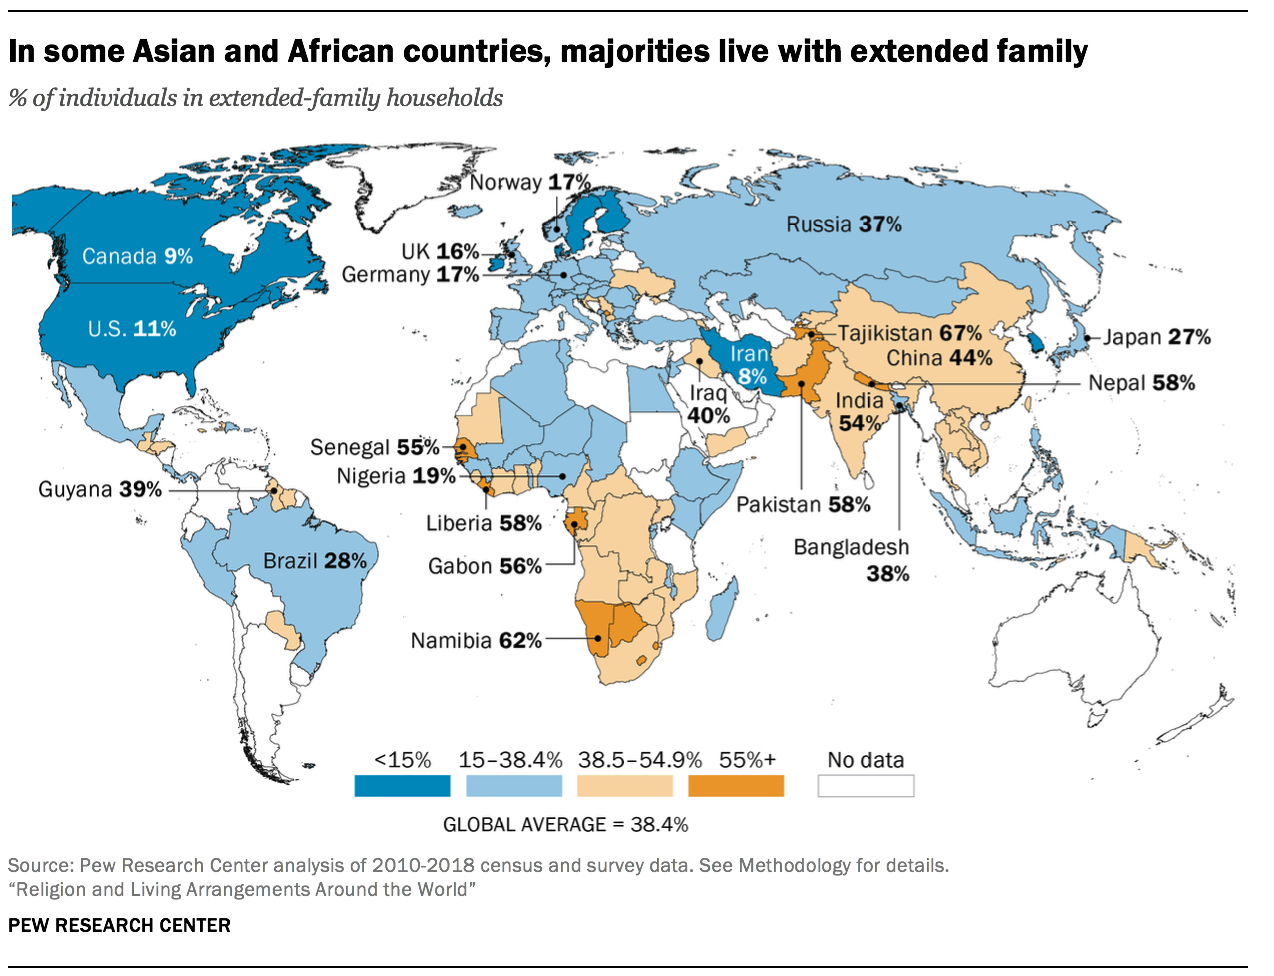 In some Asian and African countries, majorities live with extended family